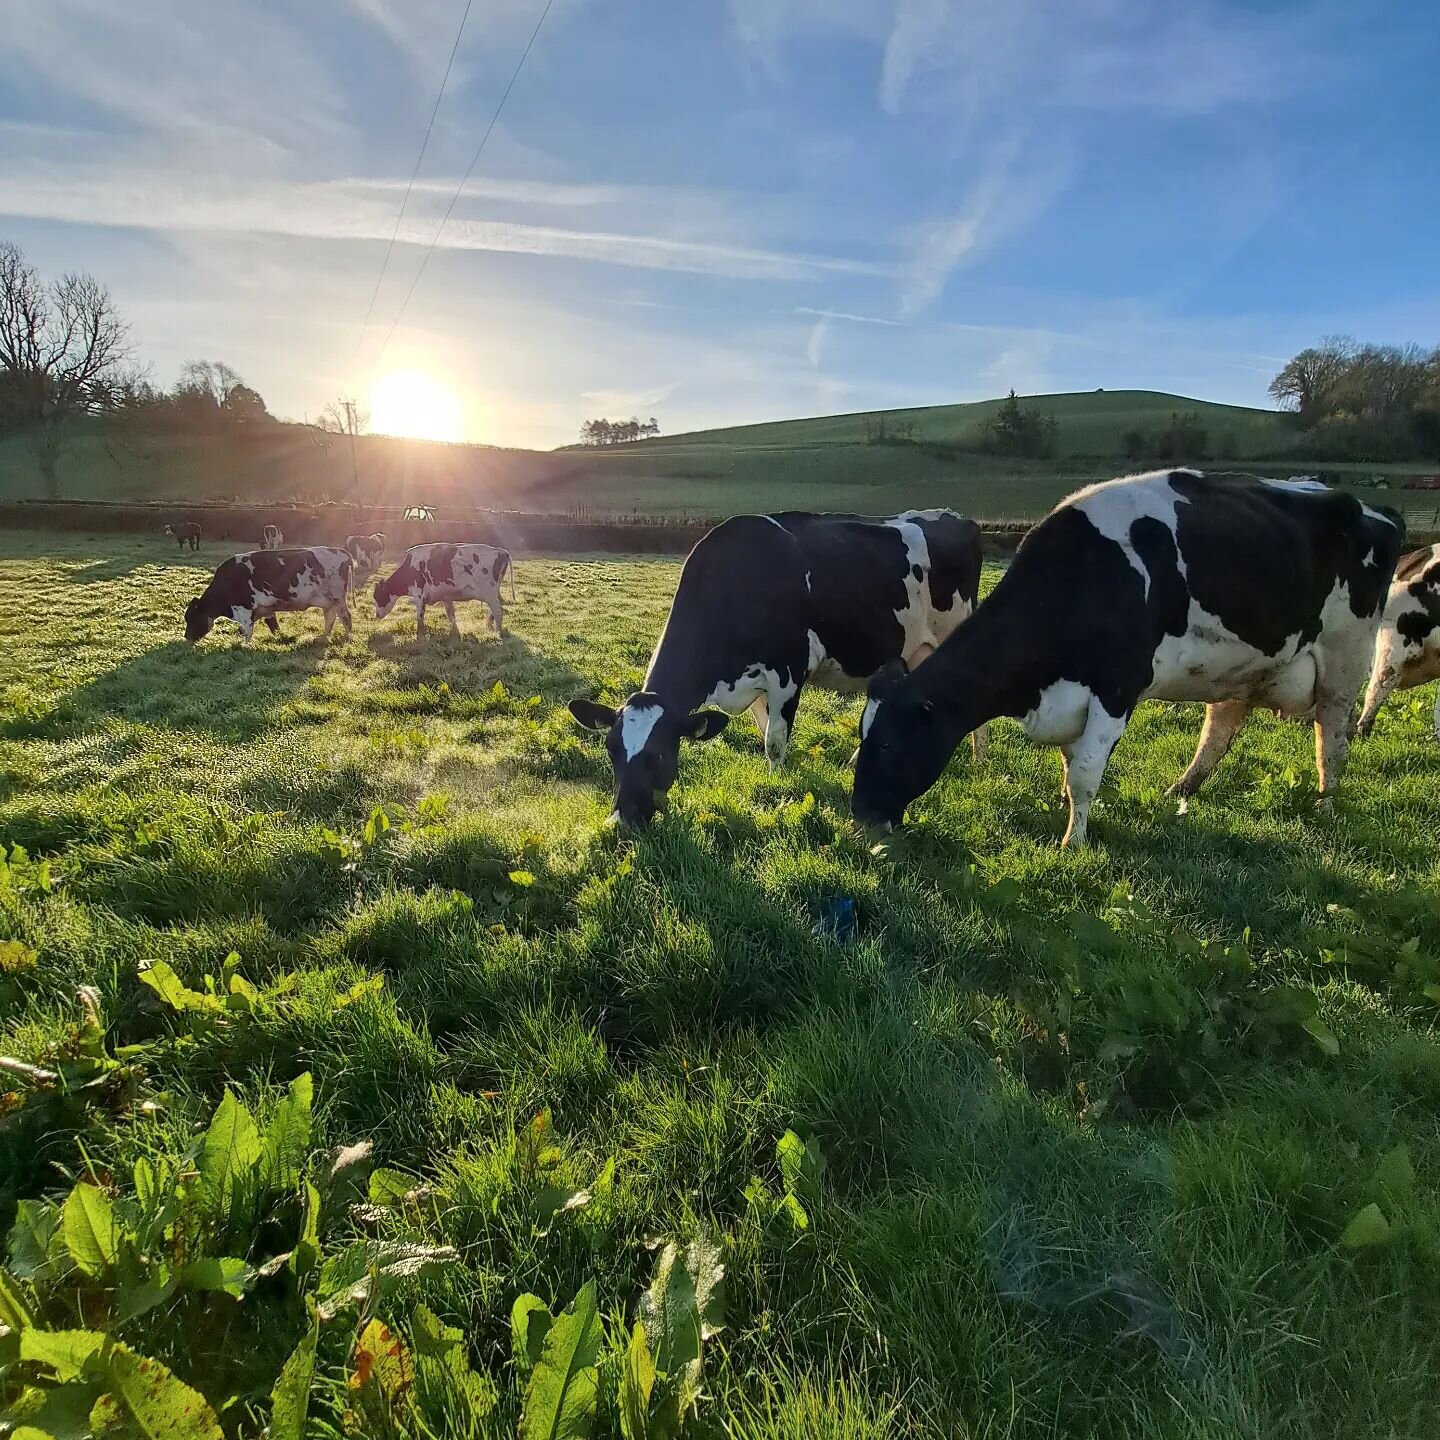 THE NATURAL WAY♻️
.
No artificial fertilisers or pesticides were used to grow this grass (as you can tell by the weeds) 
.
Just, Cows eating organic grass 🌱
.
 💩ing' directly onto the soil, for the dung beatles to break that down and feed the grass